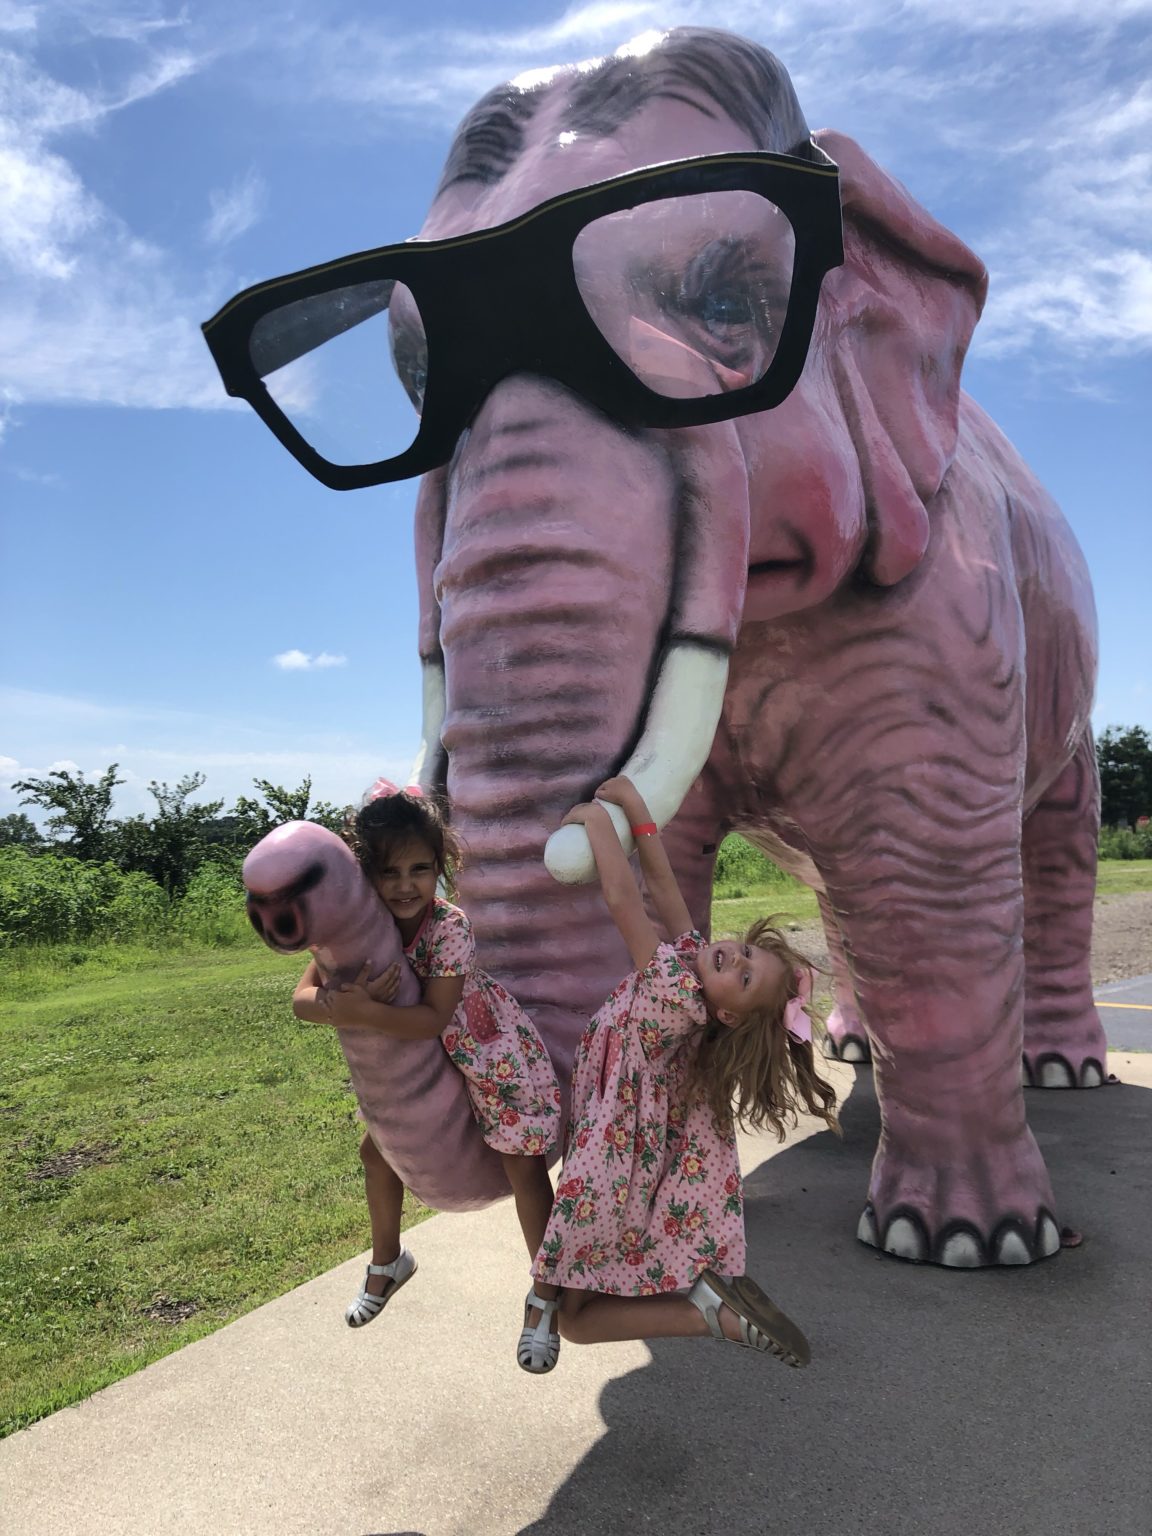 Another Roadside Attraction - Pinkie the Pink Elephant 